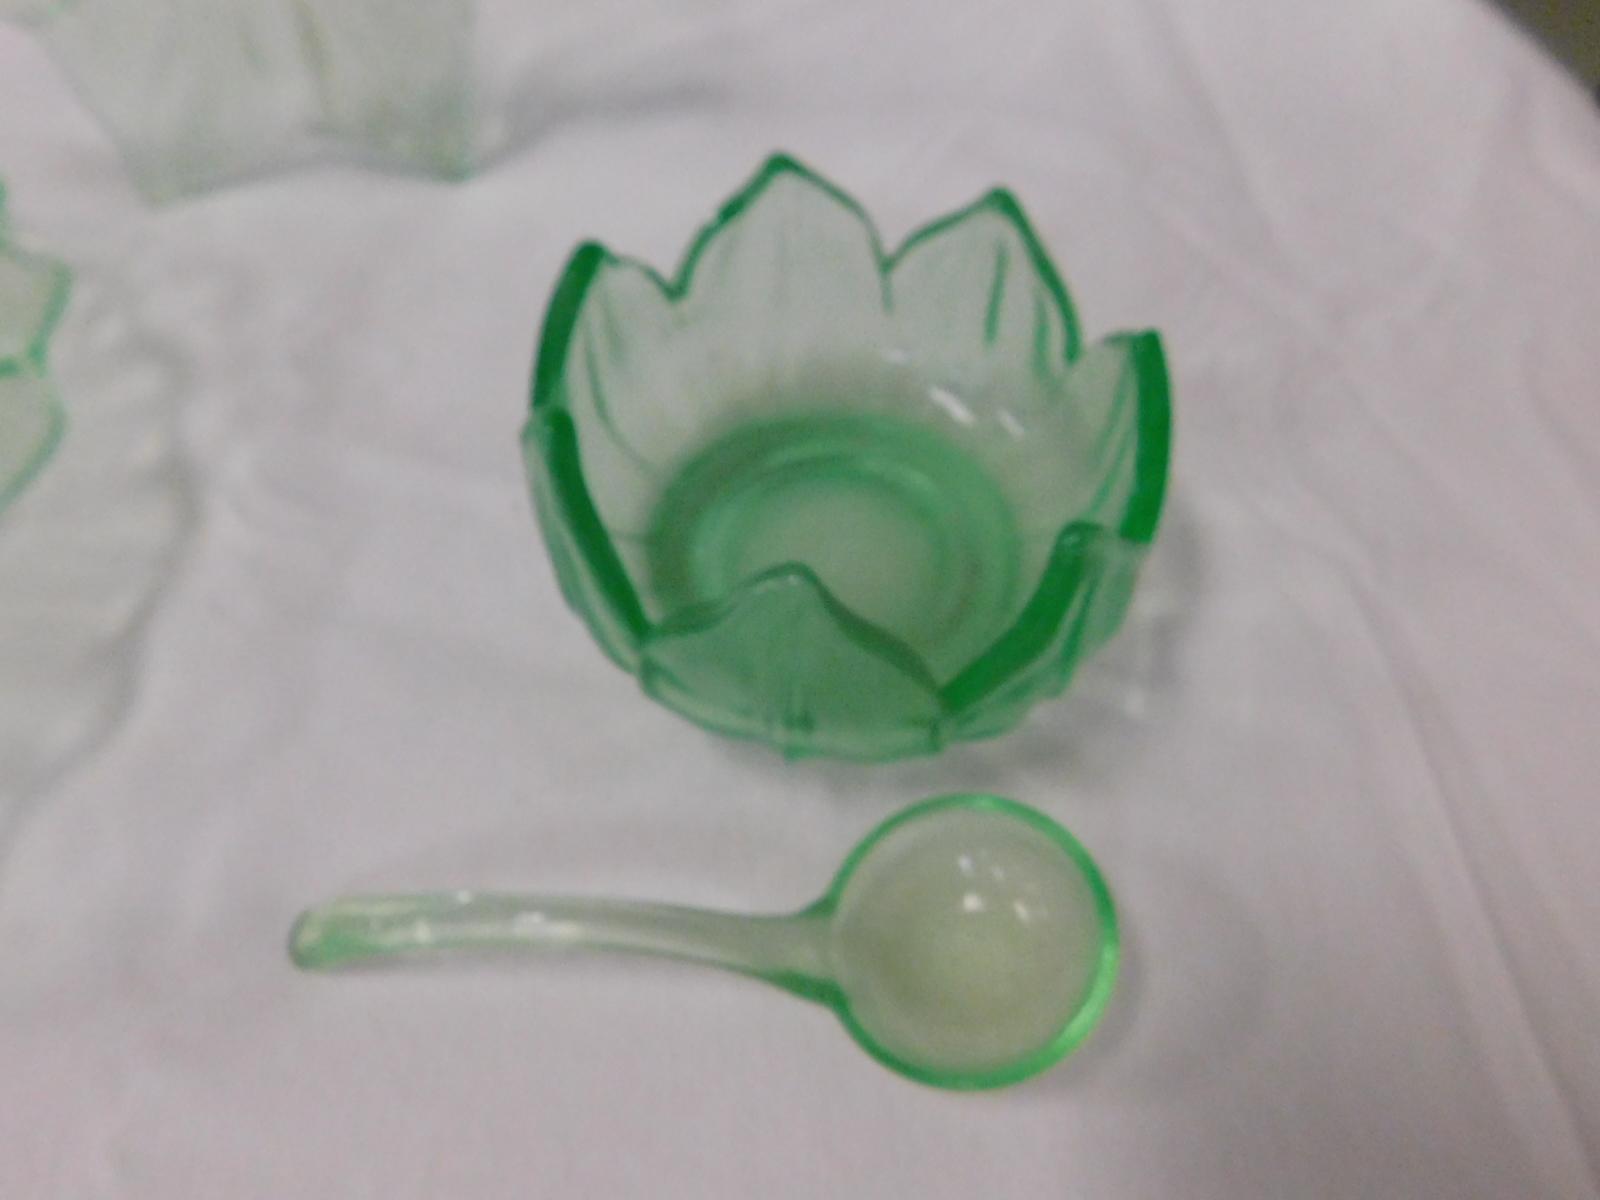 (4) PIECES GREEN DEPRESSION GLASS